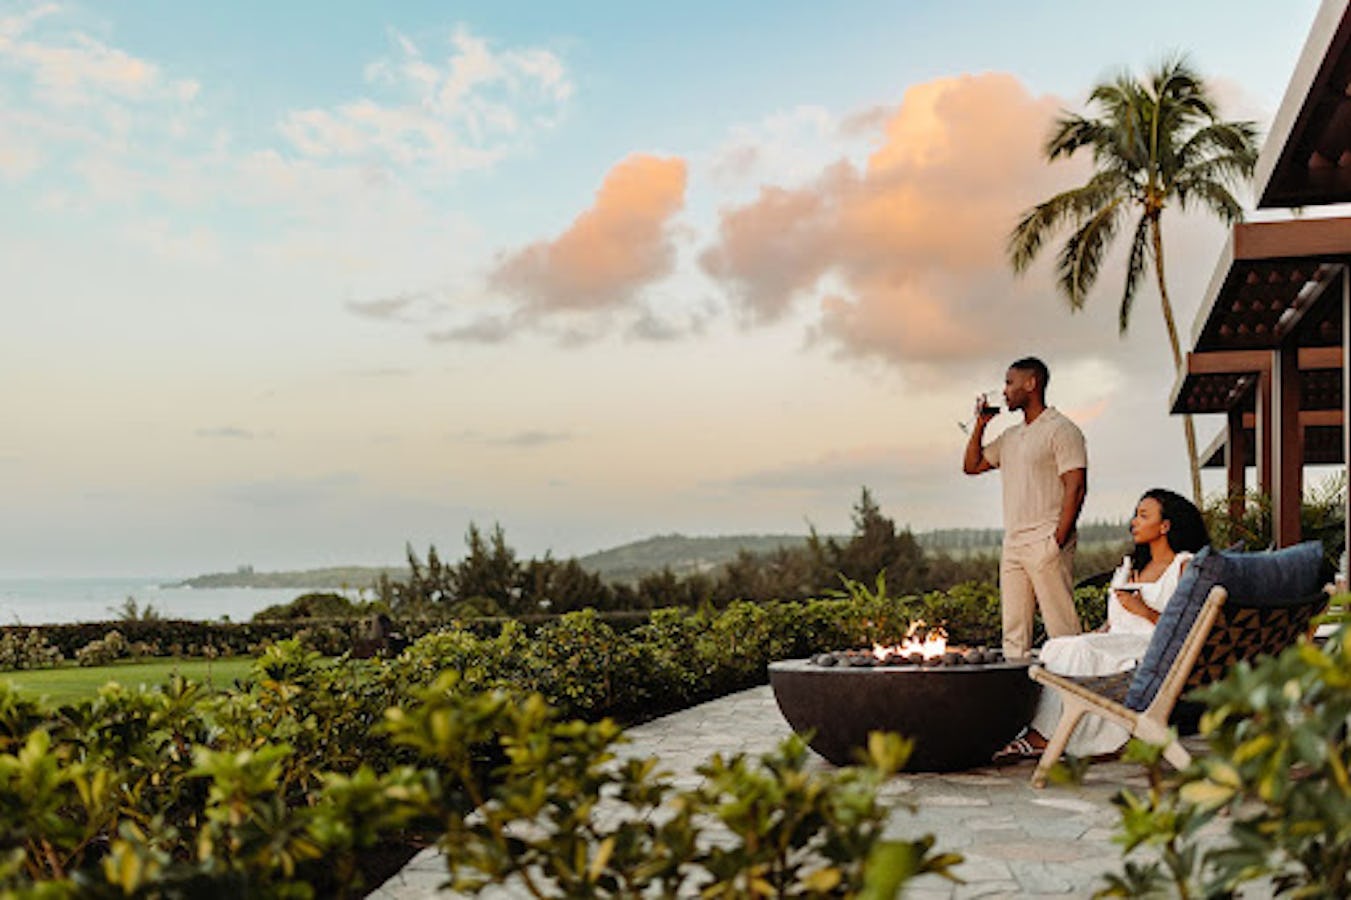 A couple enjoys a serene evening by an outdoor fire pit overlooking the ocean at a tropical resort.